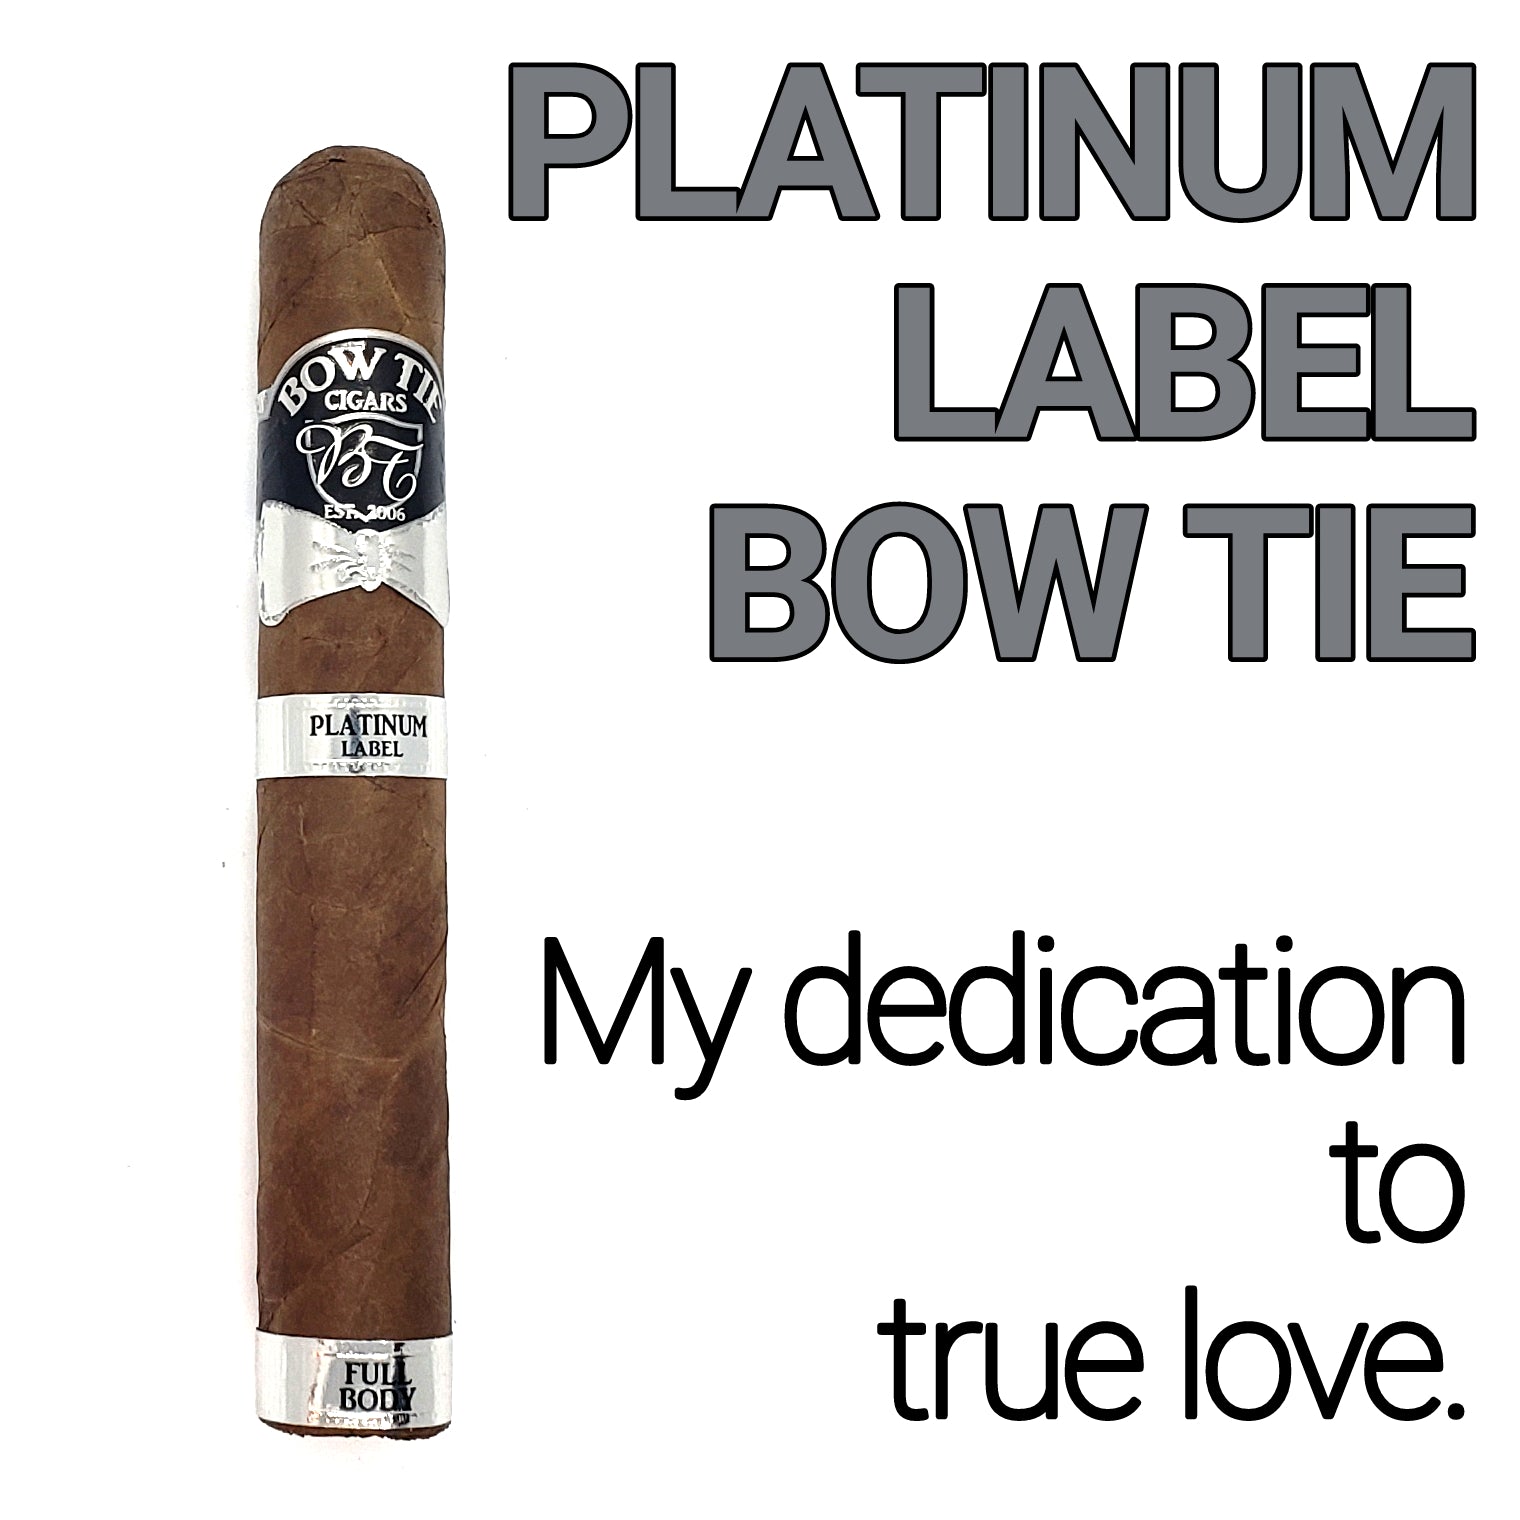 PLATINUM LABEL BOW TIE - 5 PACK CIGARS - BOW TIE CIGAR